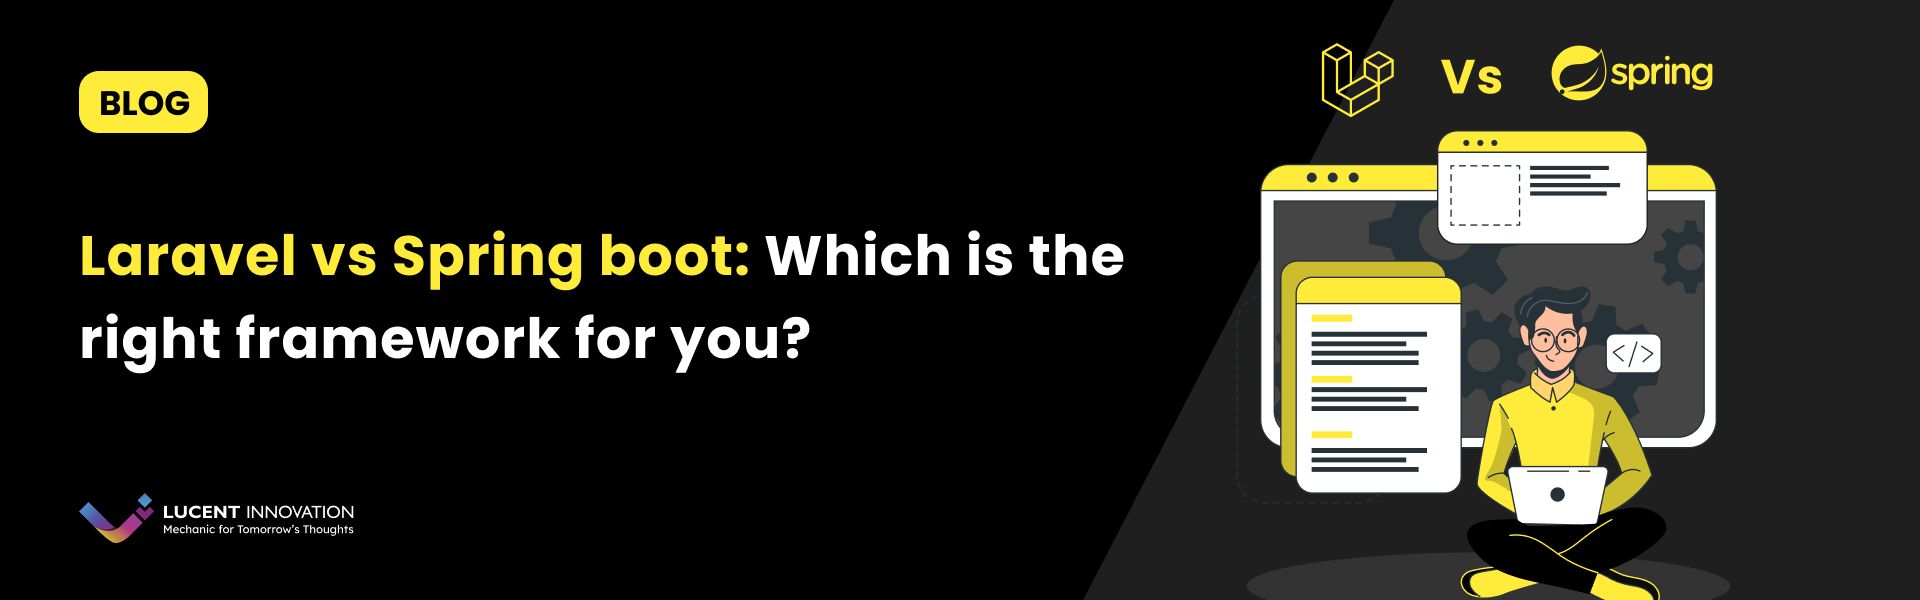 Laravel vs Spring boot: Which is the right framework for you?